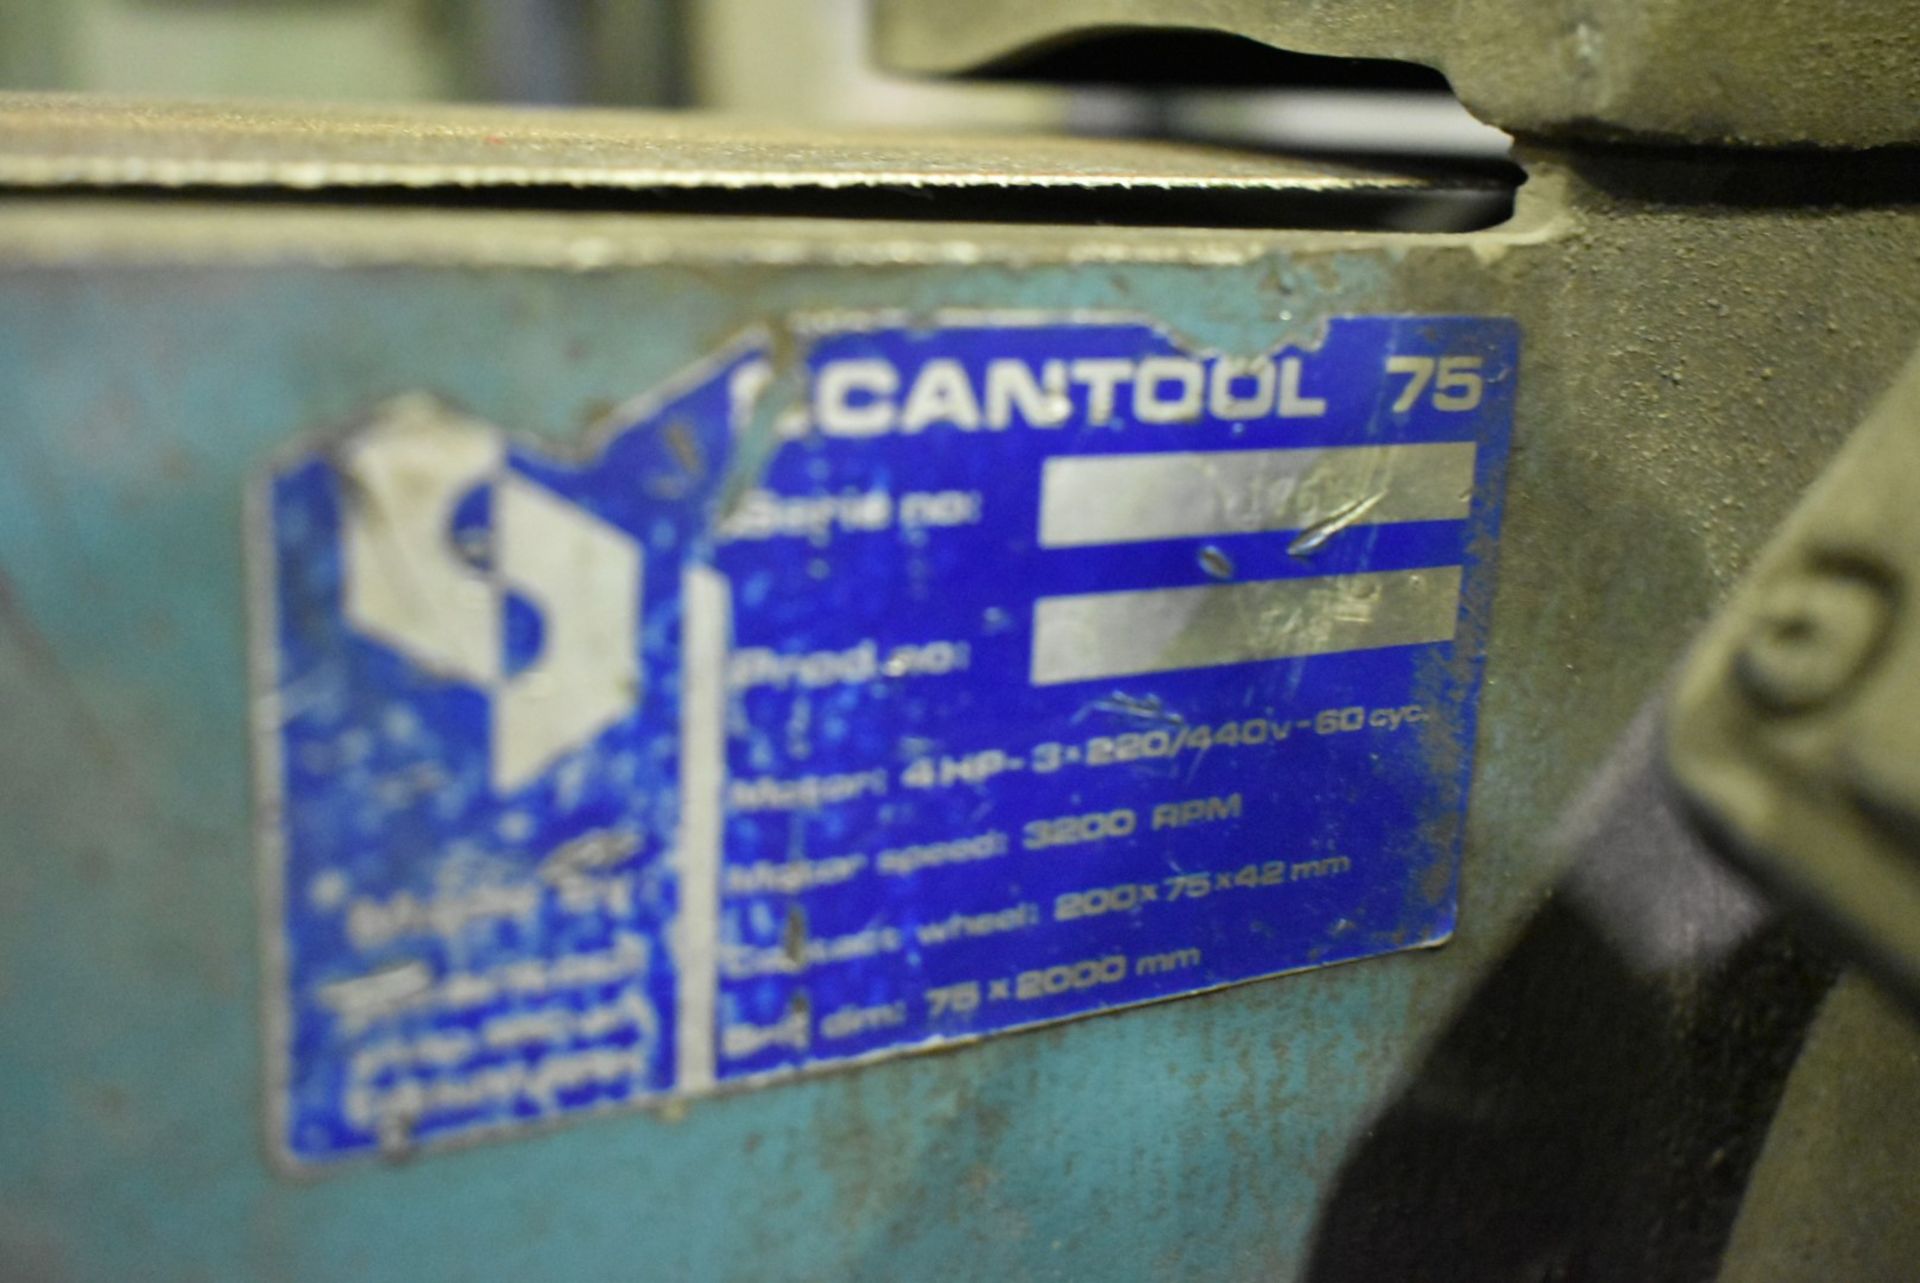 SCANTOOL 75 4" HORIZONTAL BELT SANDER WITH SPEEDS TO 3200 RPM, 4 HP, S/N: 176 (CI) - Image 3 of 3